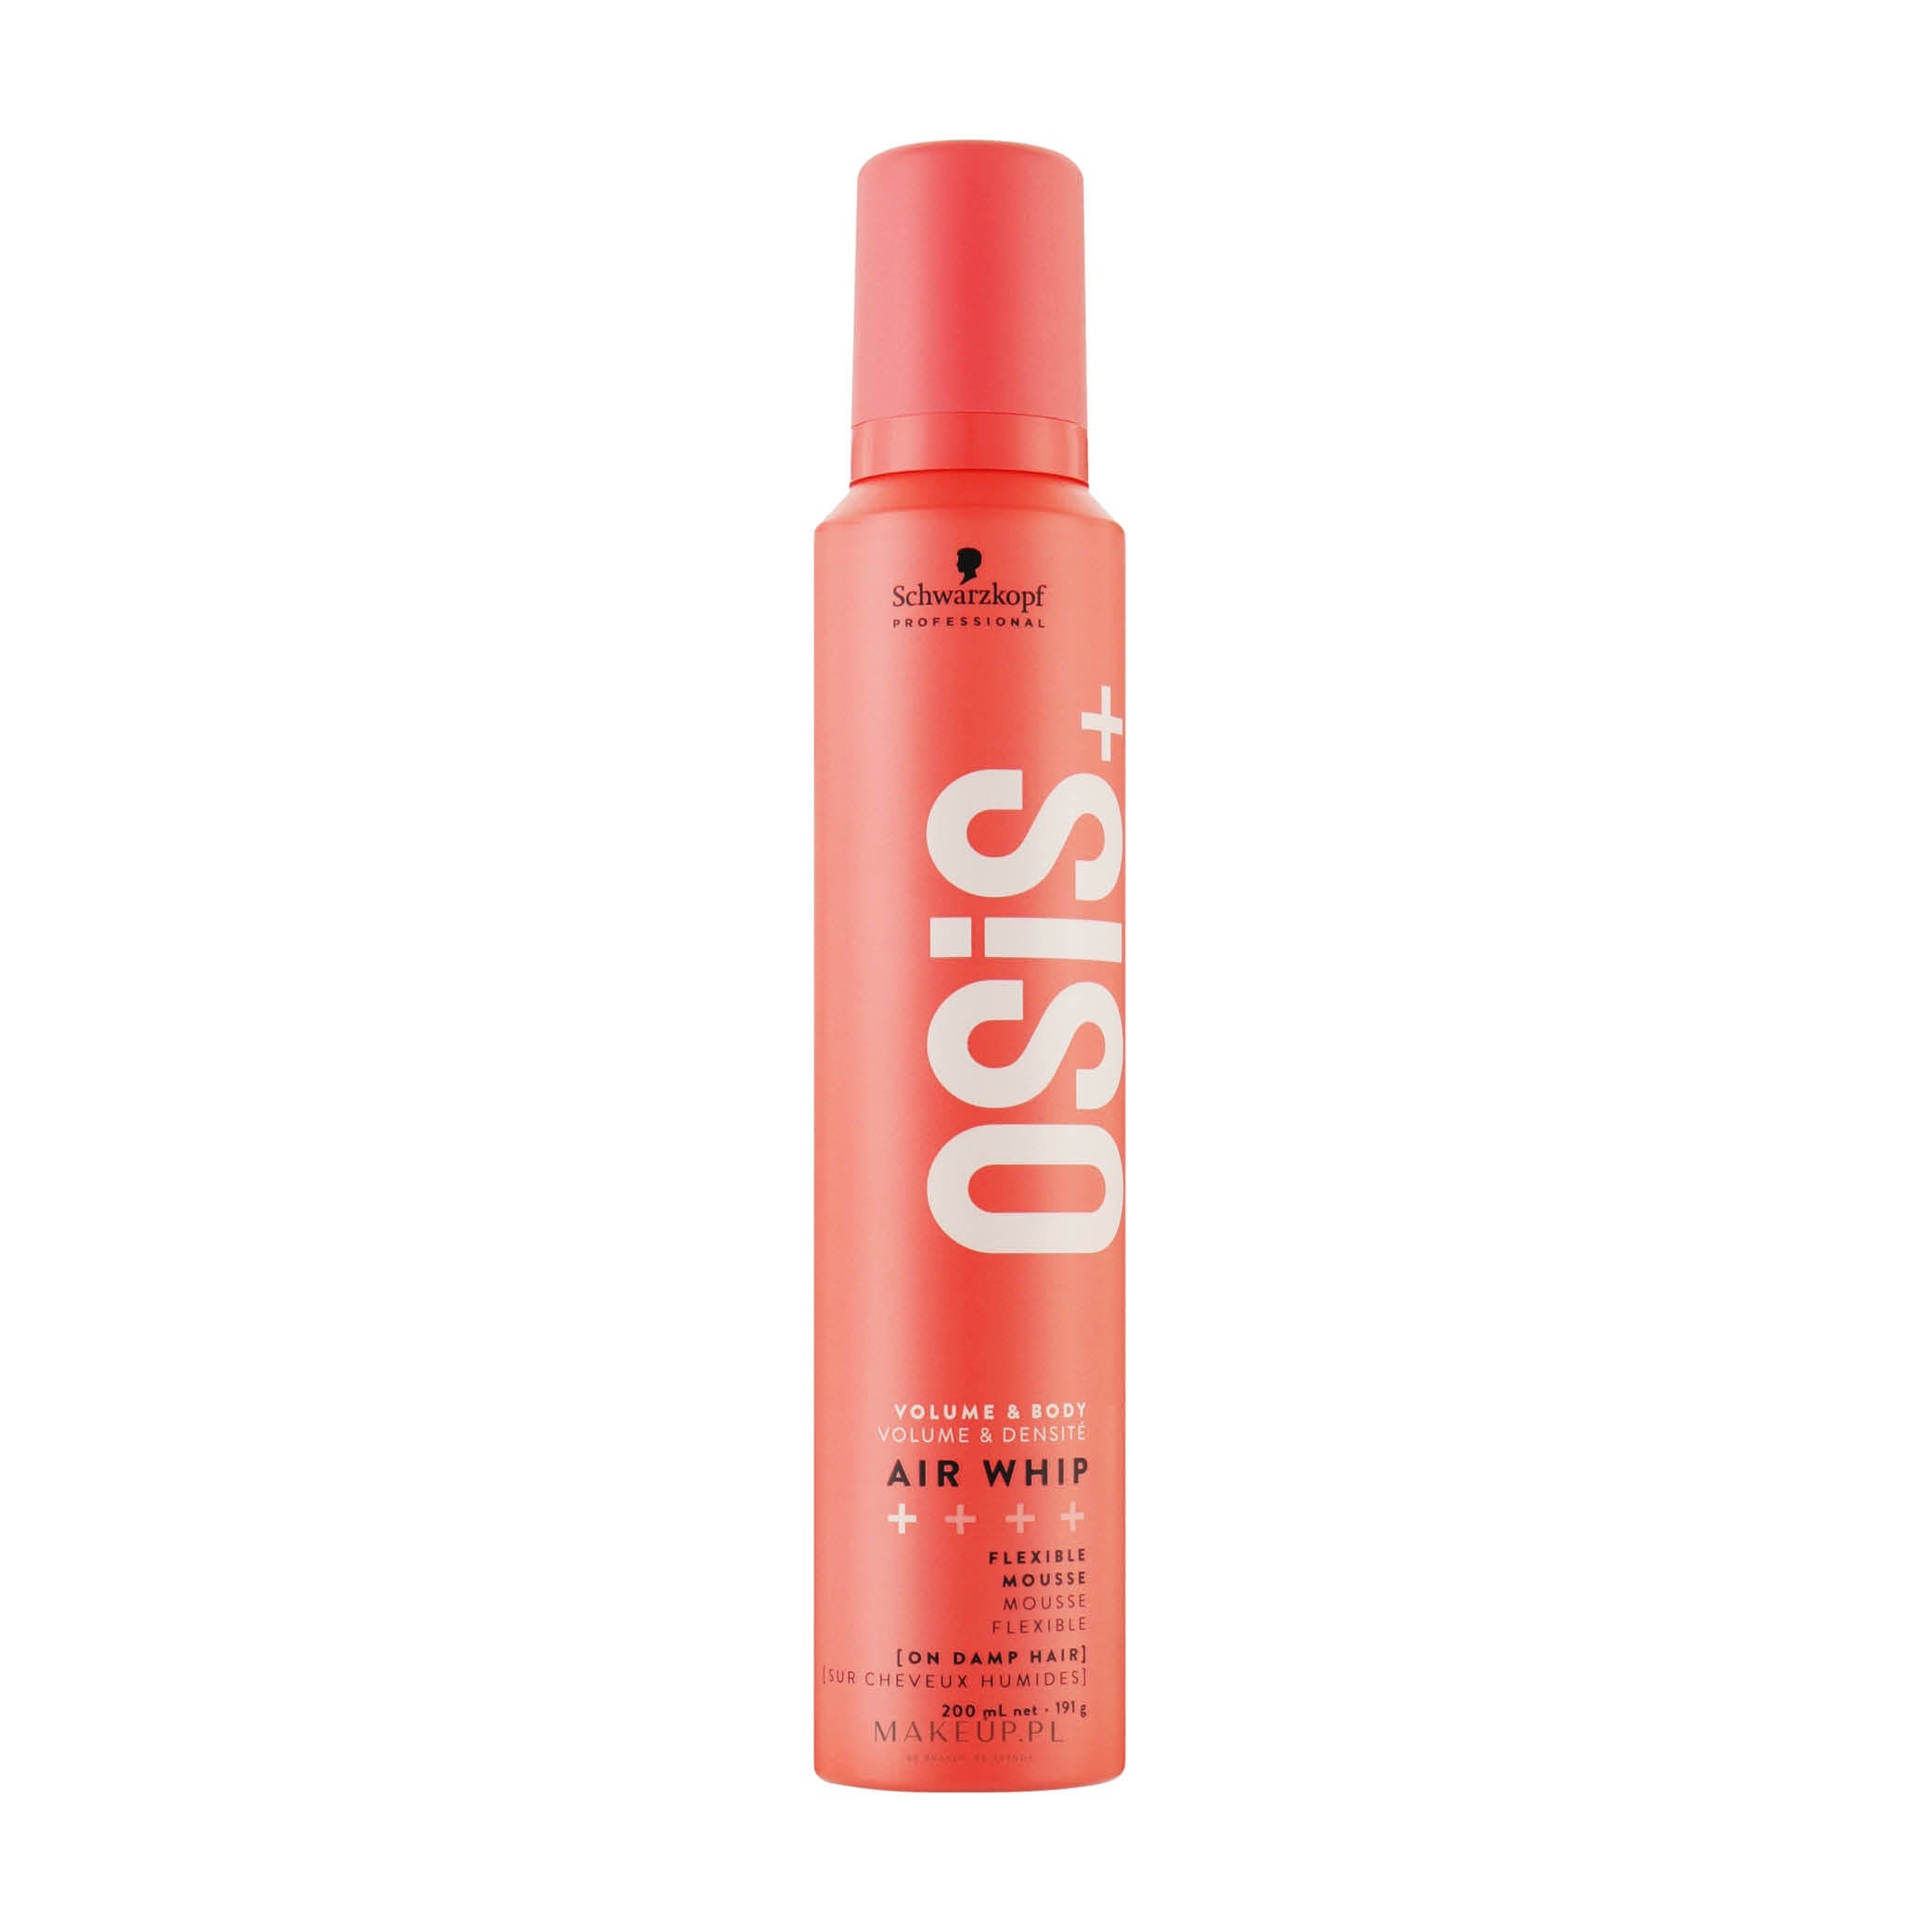 OSiS+ Air Whip - Flexible Mousse